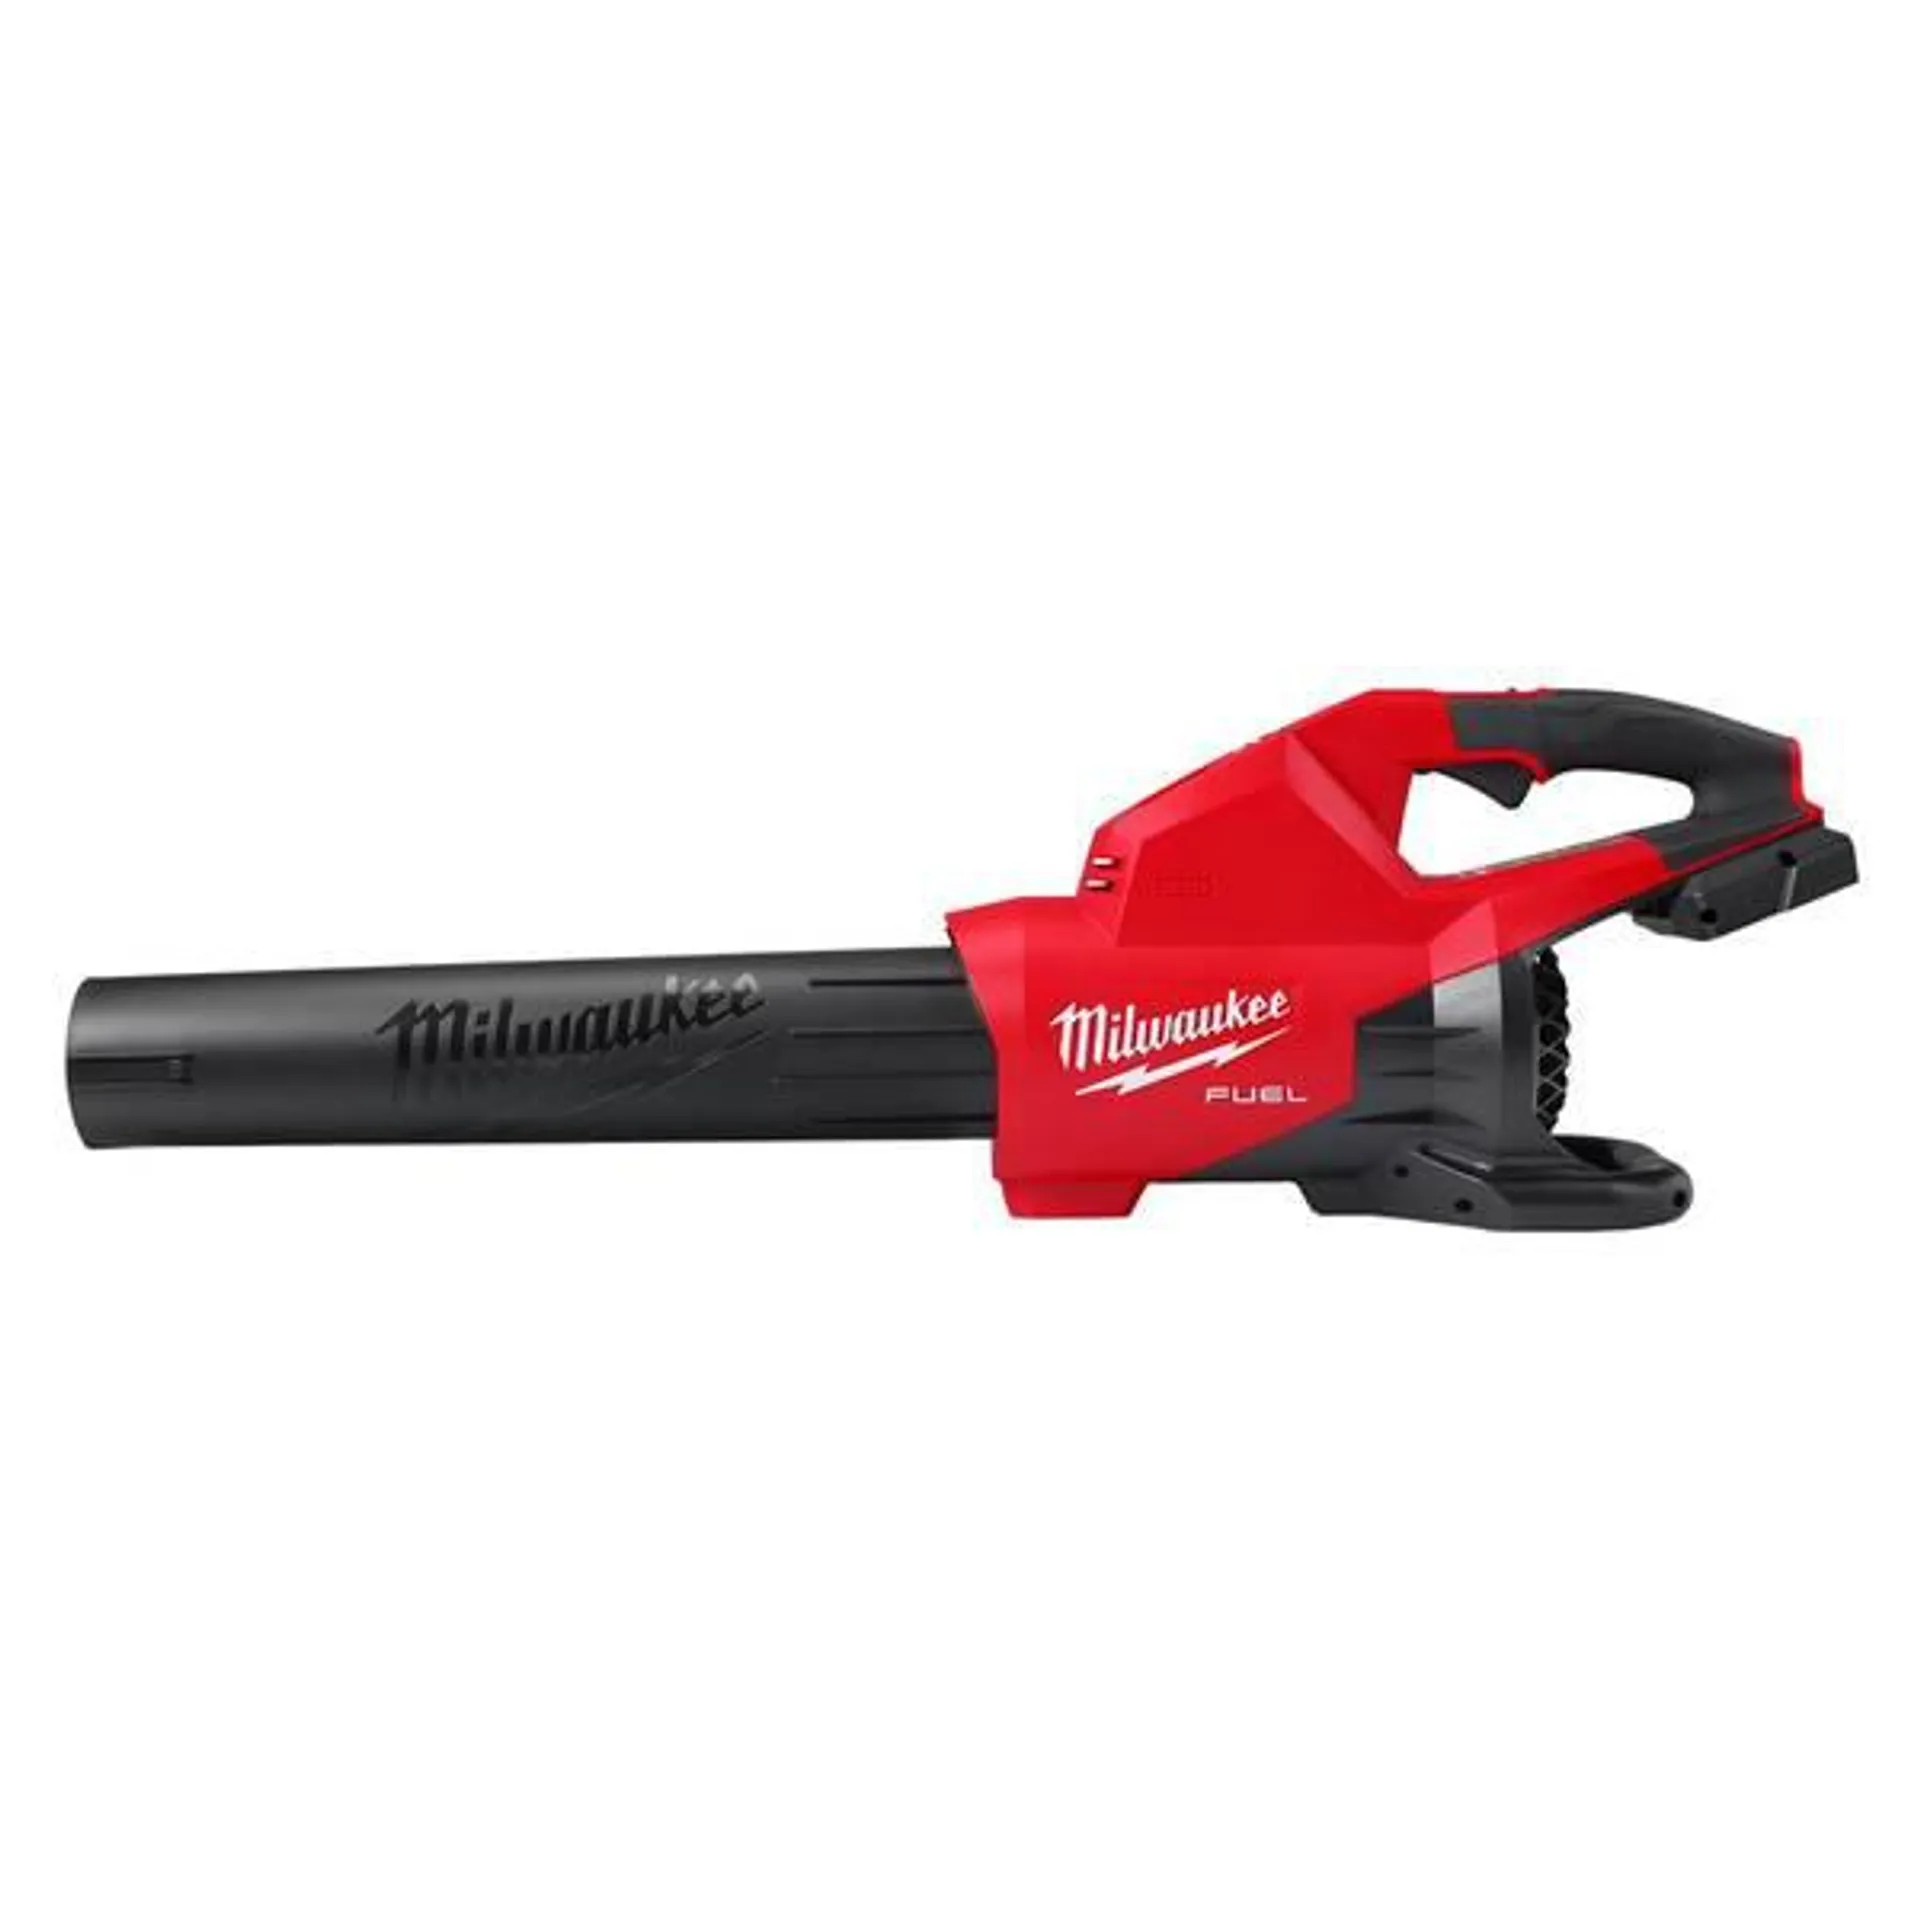 M18 Fuel Dual Battery Blower Bare Tool